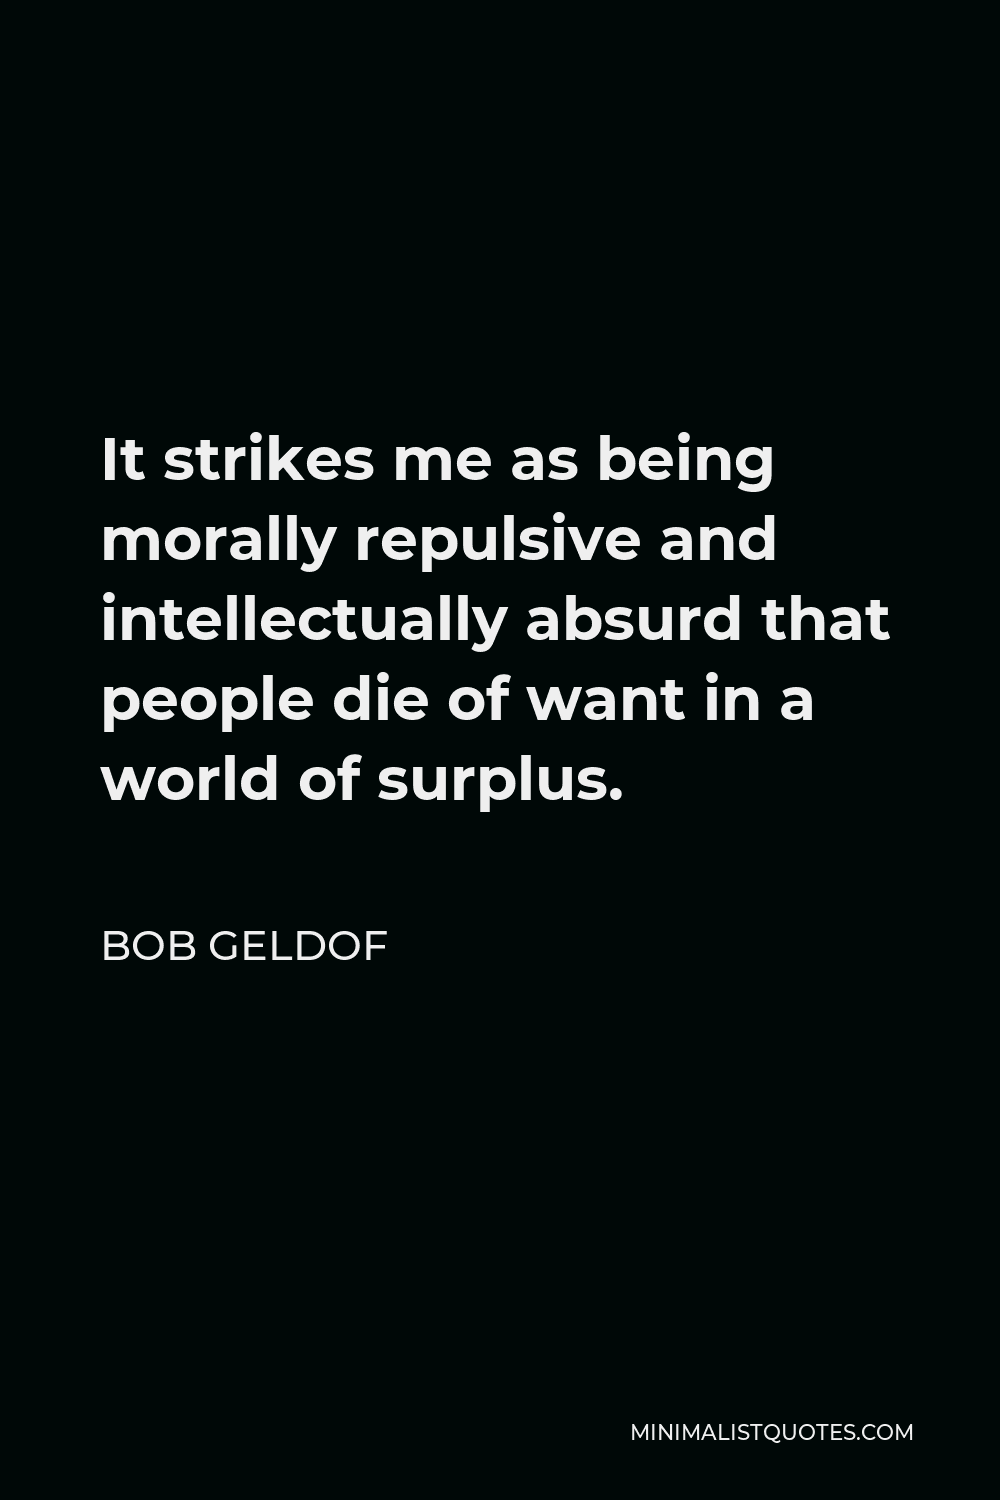 Bob Geldof Quote - It strikes me as being morally repulsive and intellectually absurd that people die of want in a world of surplus.